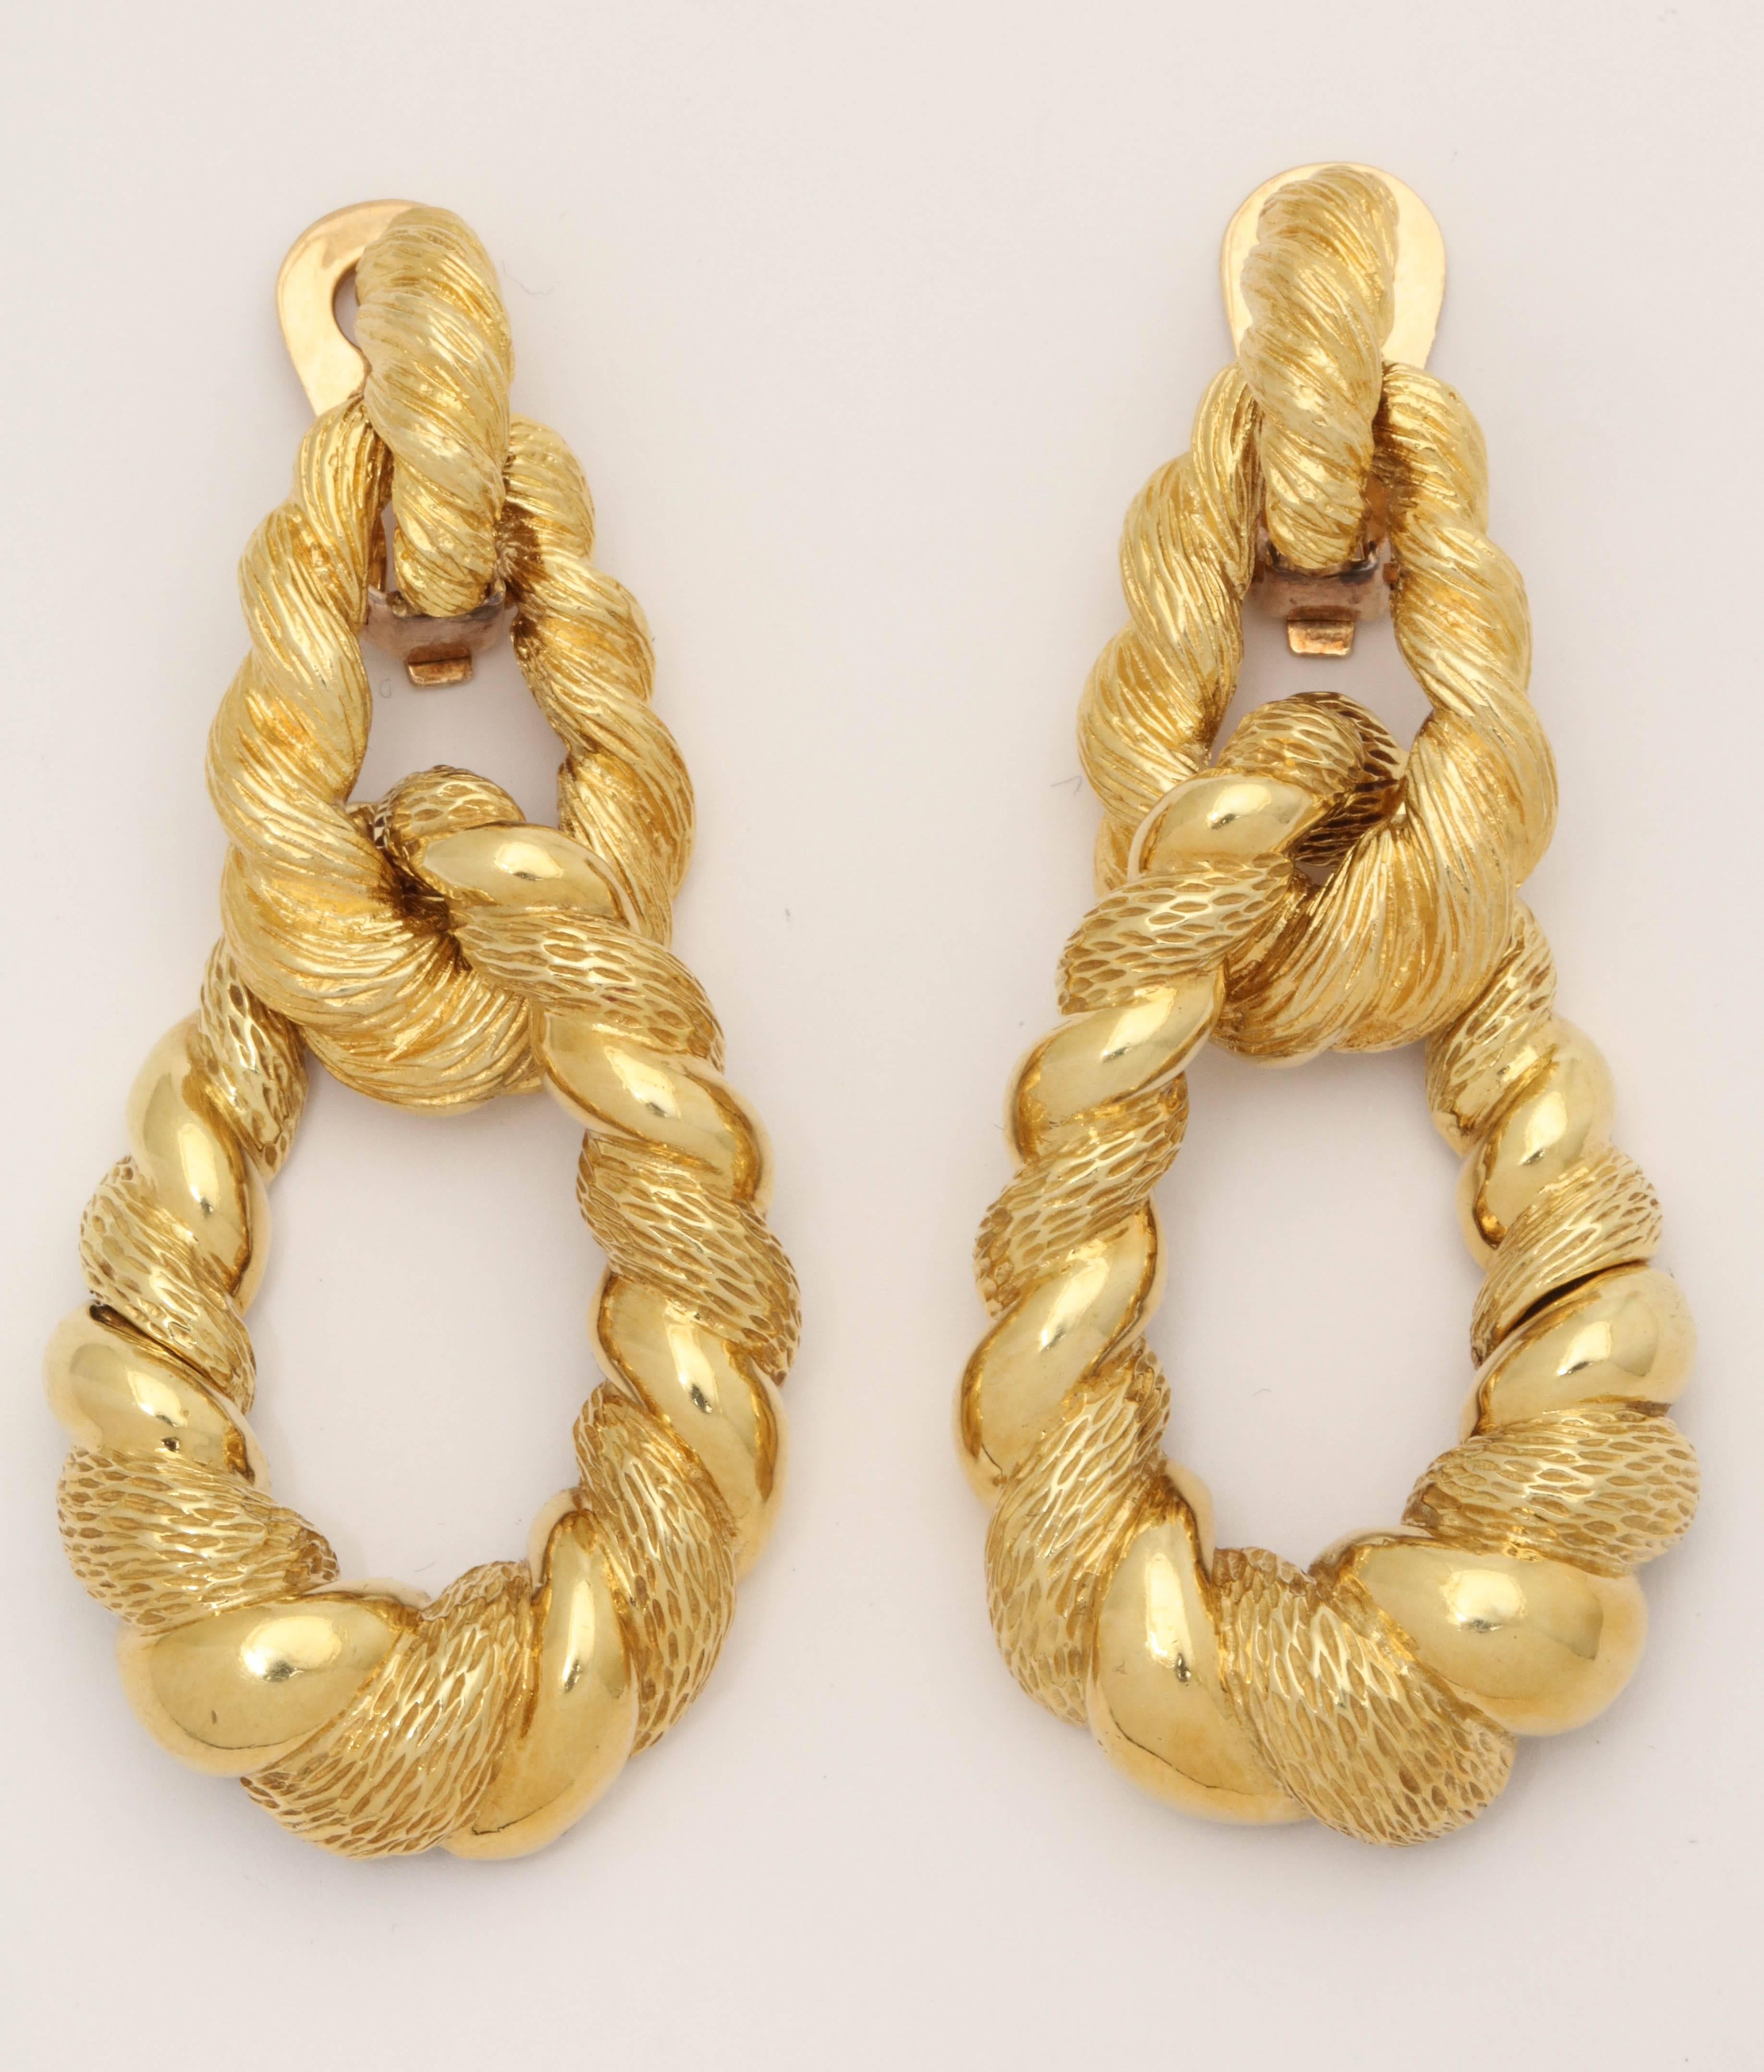 One Pair Of 18kt Yellow Gold Lond doorknocker Loop Earrings With 14kt Gold Clip Backs For Extra Strength And security. Earrings Are Designed With an Alternating Gold Nugget Finish And With A High Polish Gold Effect To Give A More Textured Gold Look.